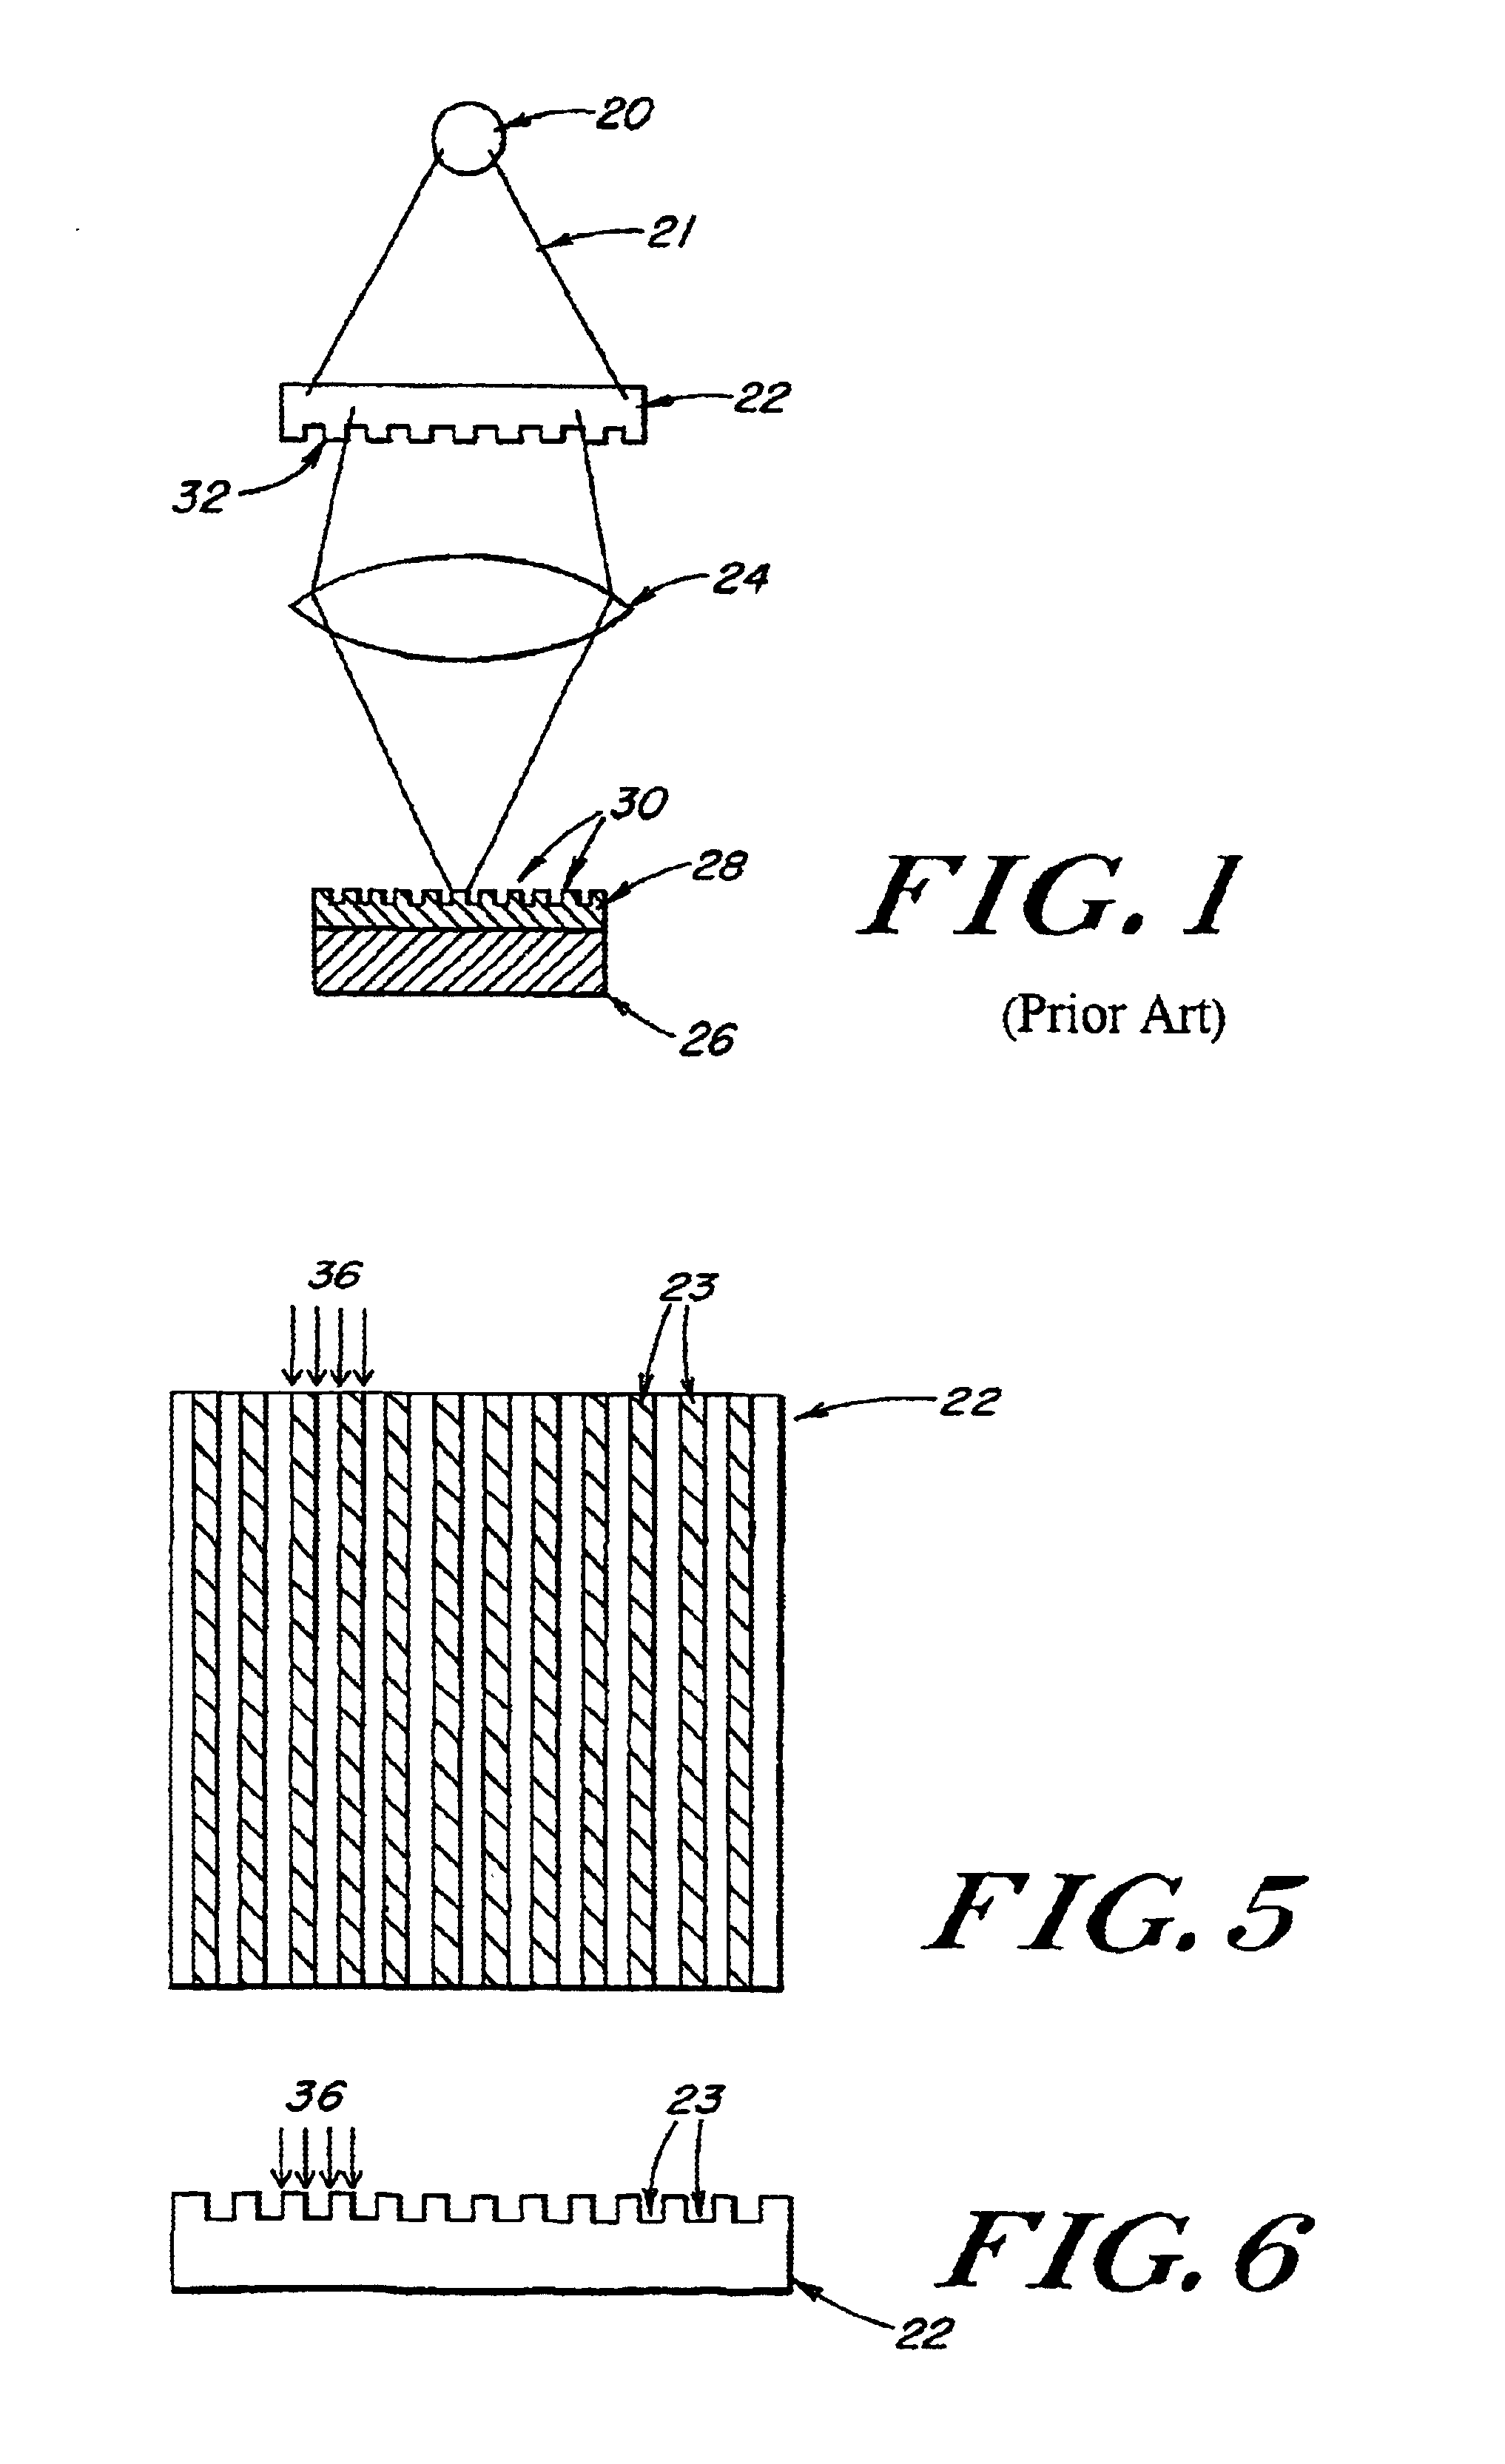 Method of design and fabrication of integrated circuits using regular arrays and gratings